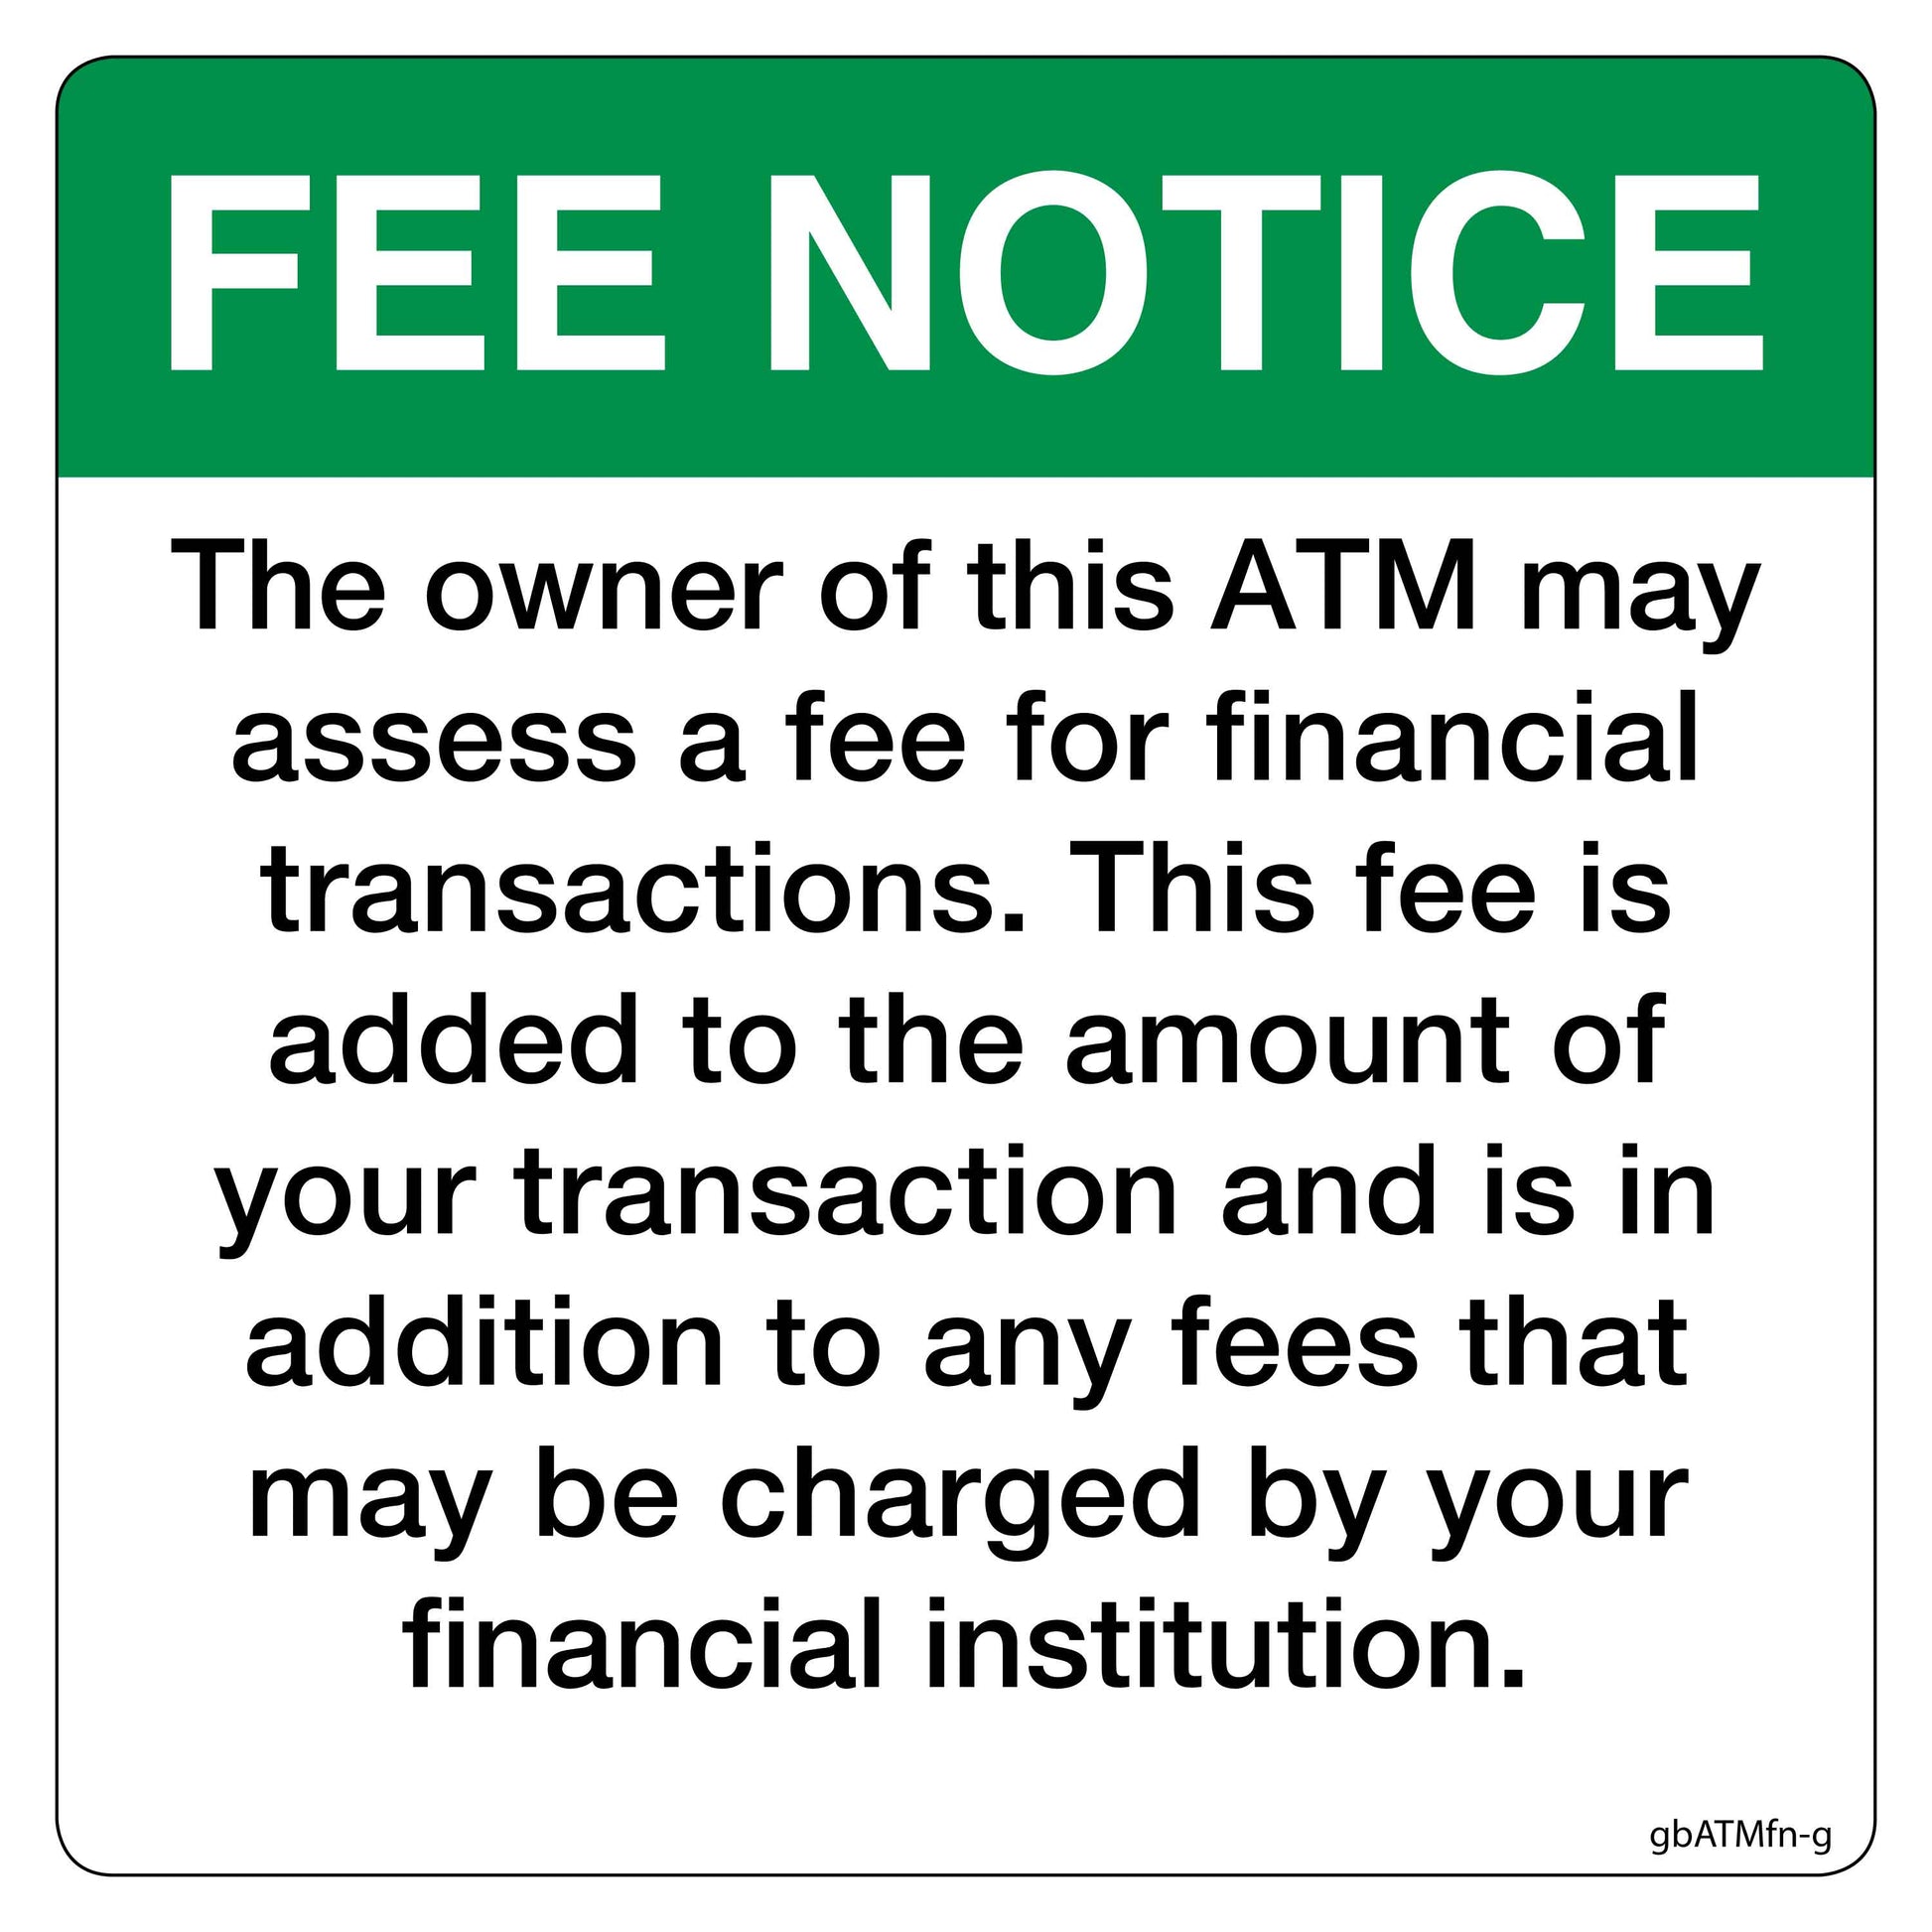 Fee Notice Decal, Green - 4 inches by 4 inches in size. 